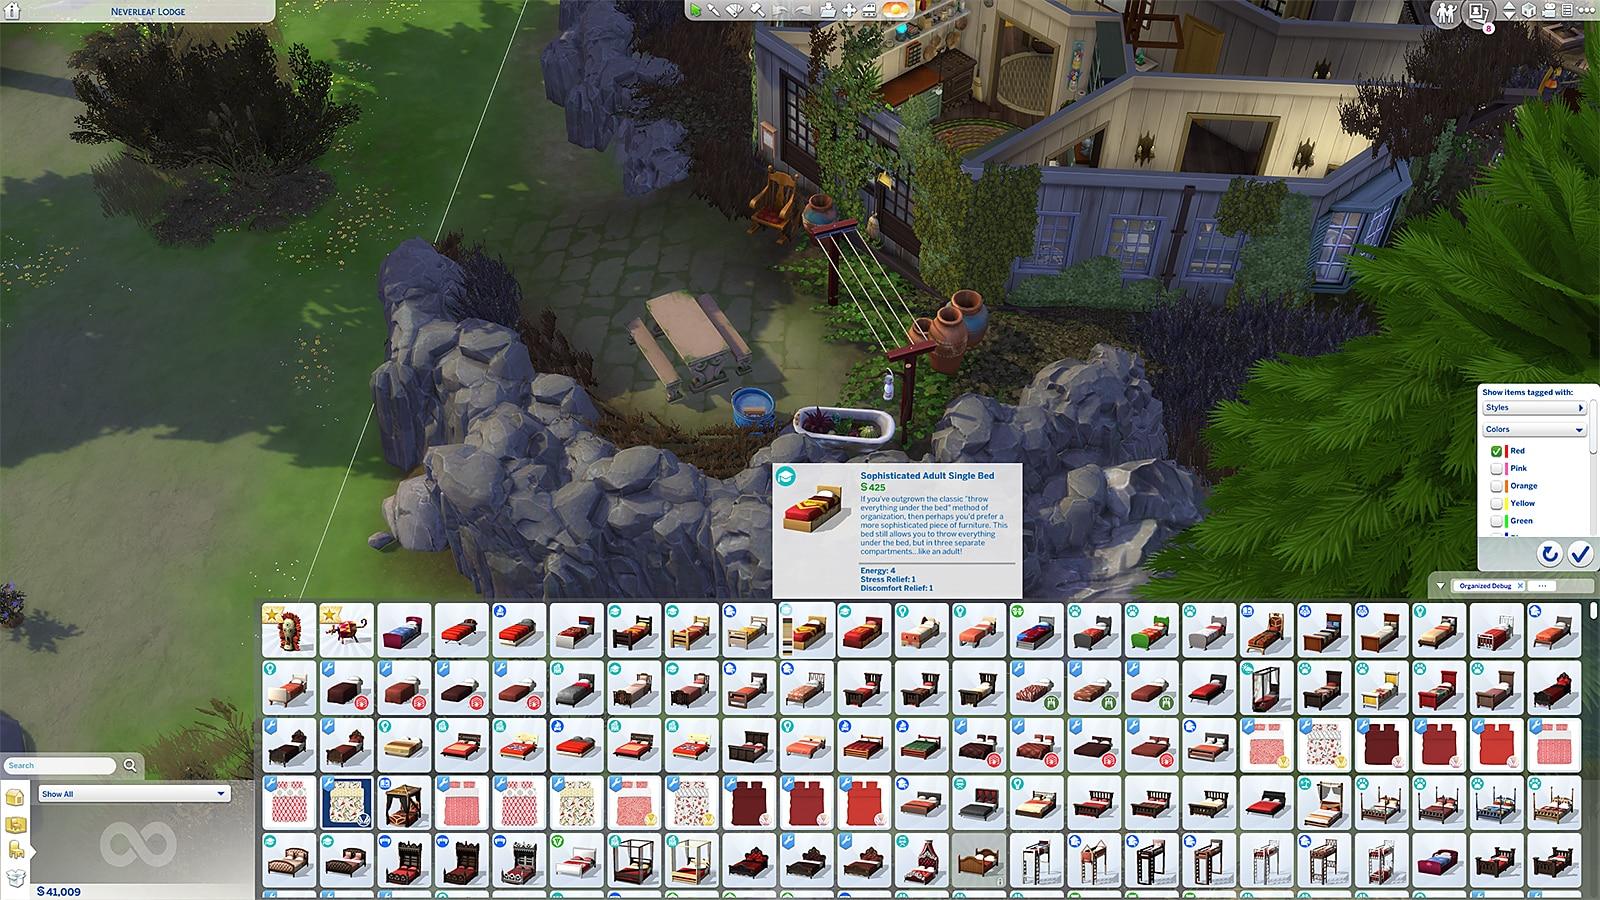 The Sims 4 Modding Is About To Become Easier